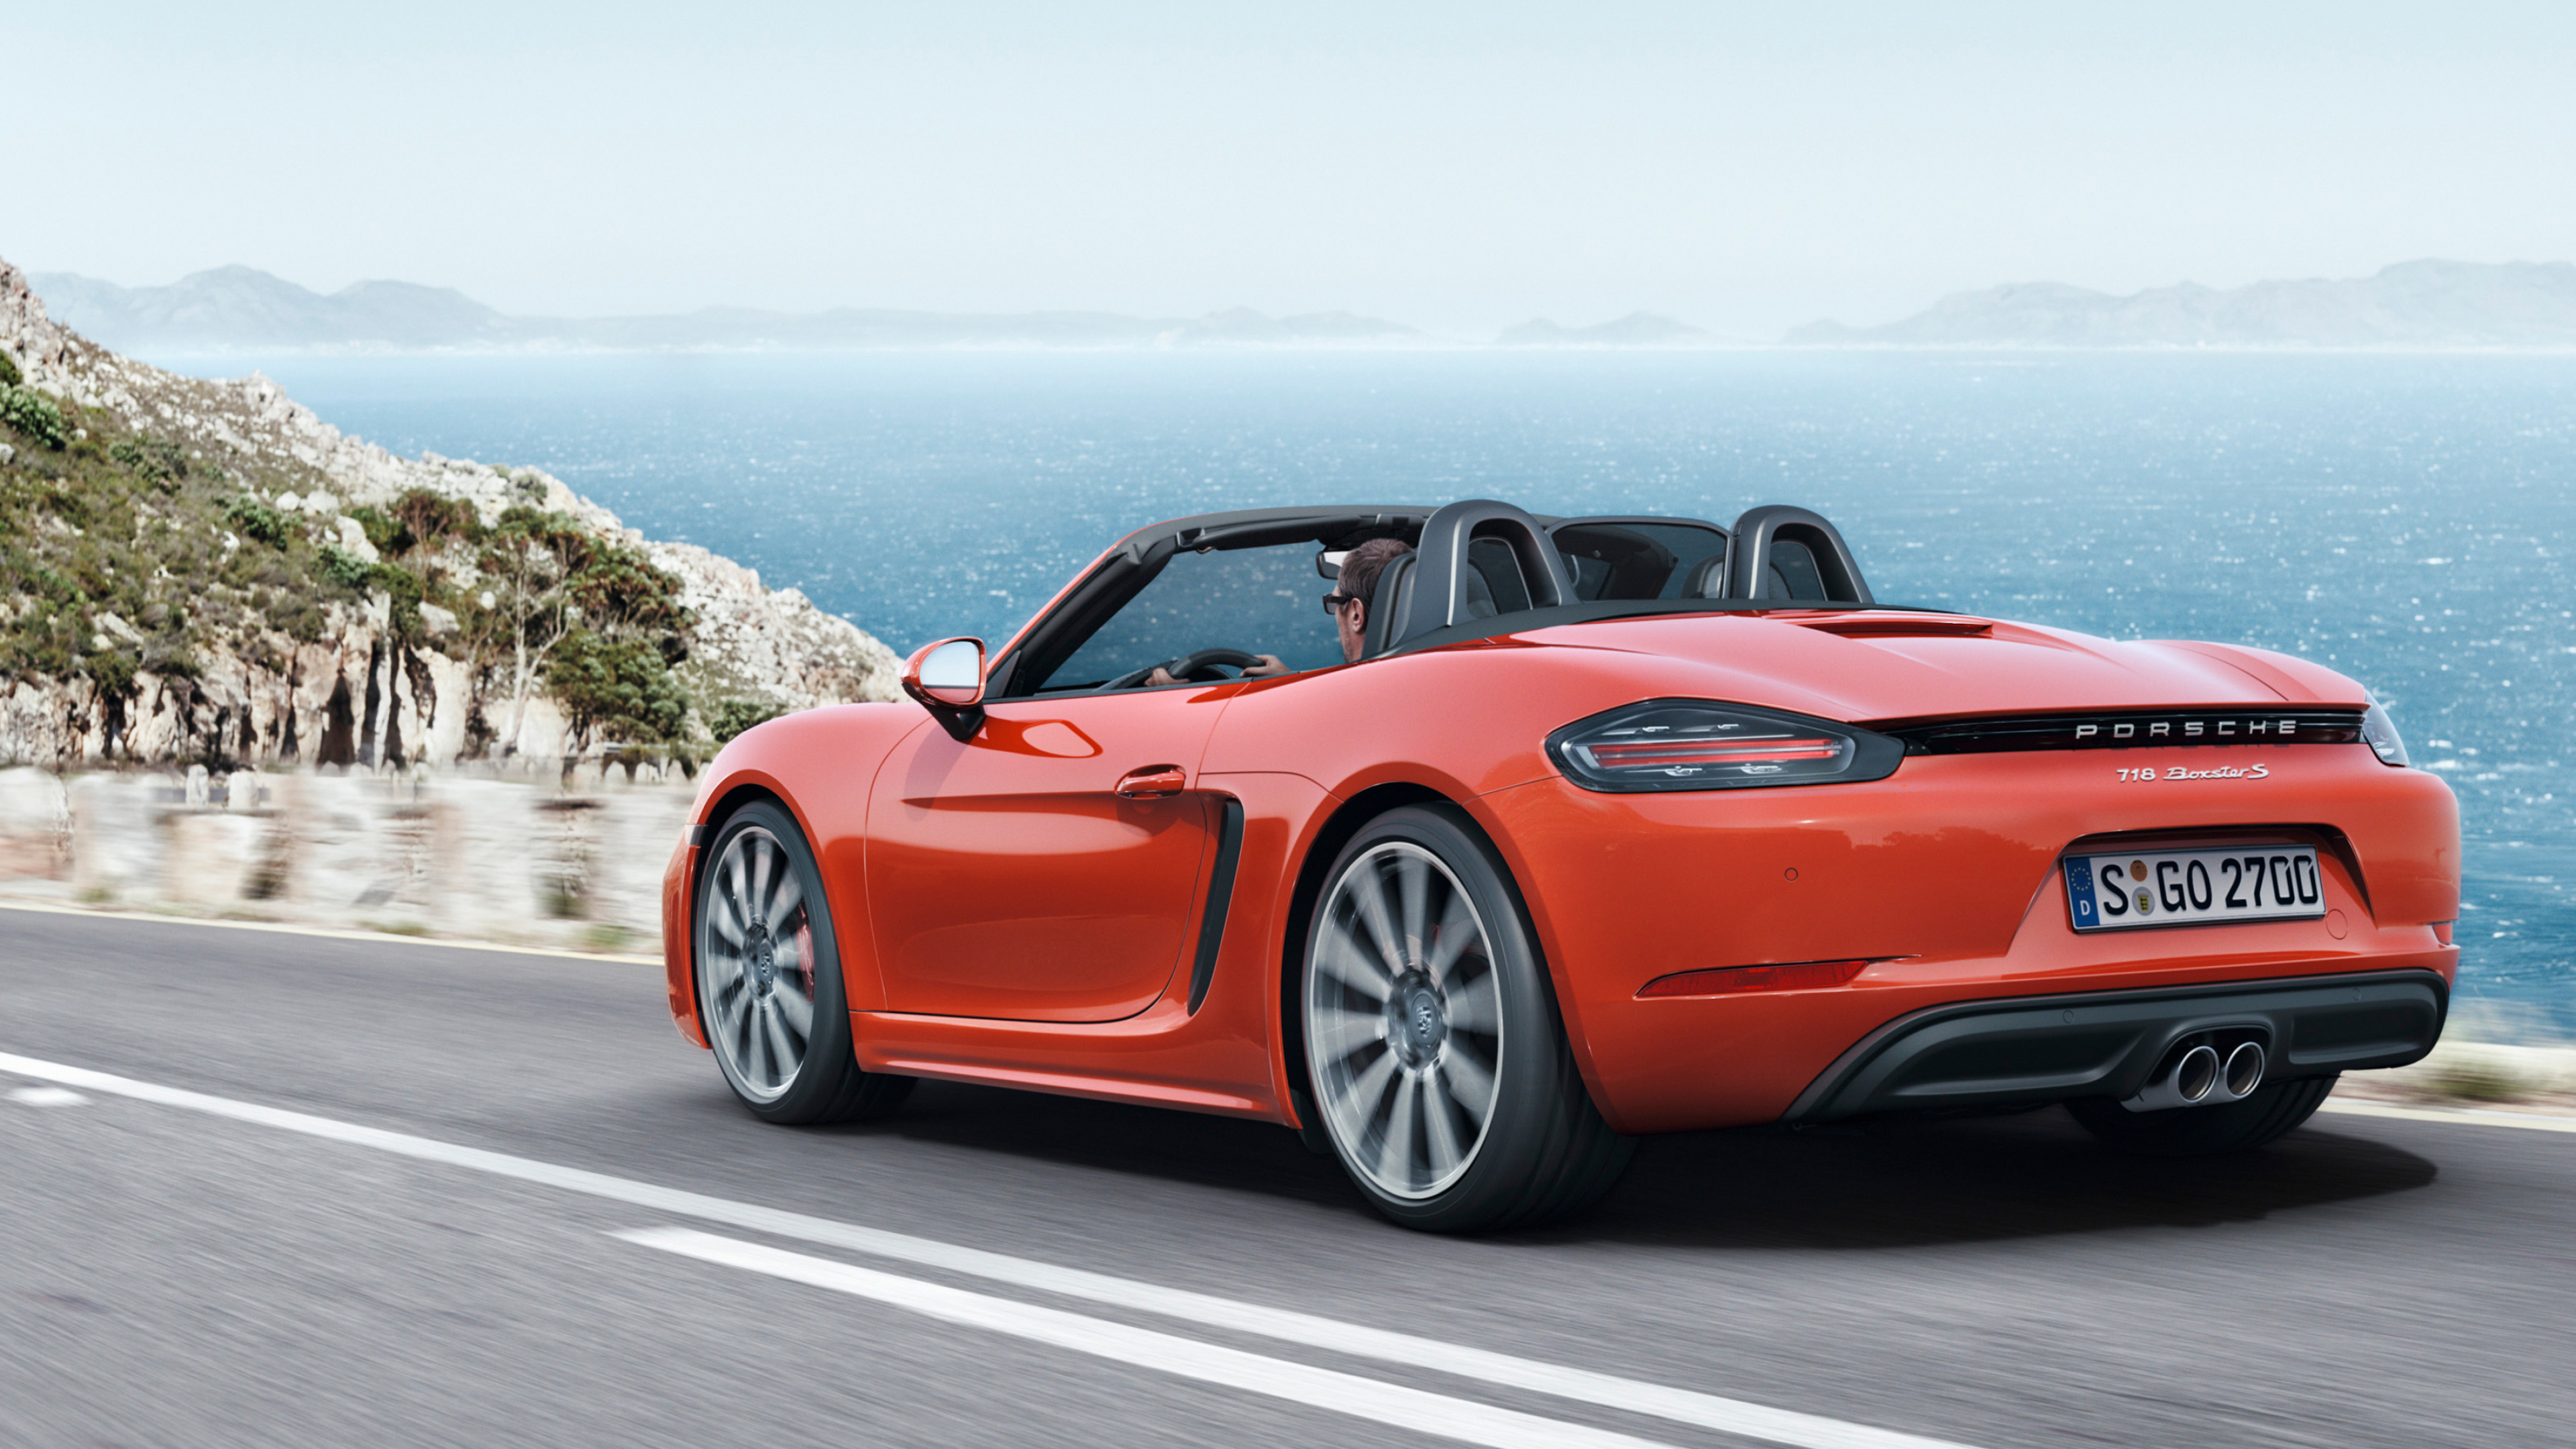 Porsche Boxster, Luxury sports car, High-resolution wallpapers, Ultimate driving experience, 3840x2160 4K Desktop